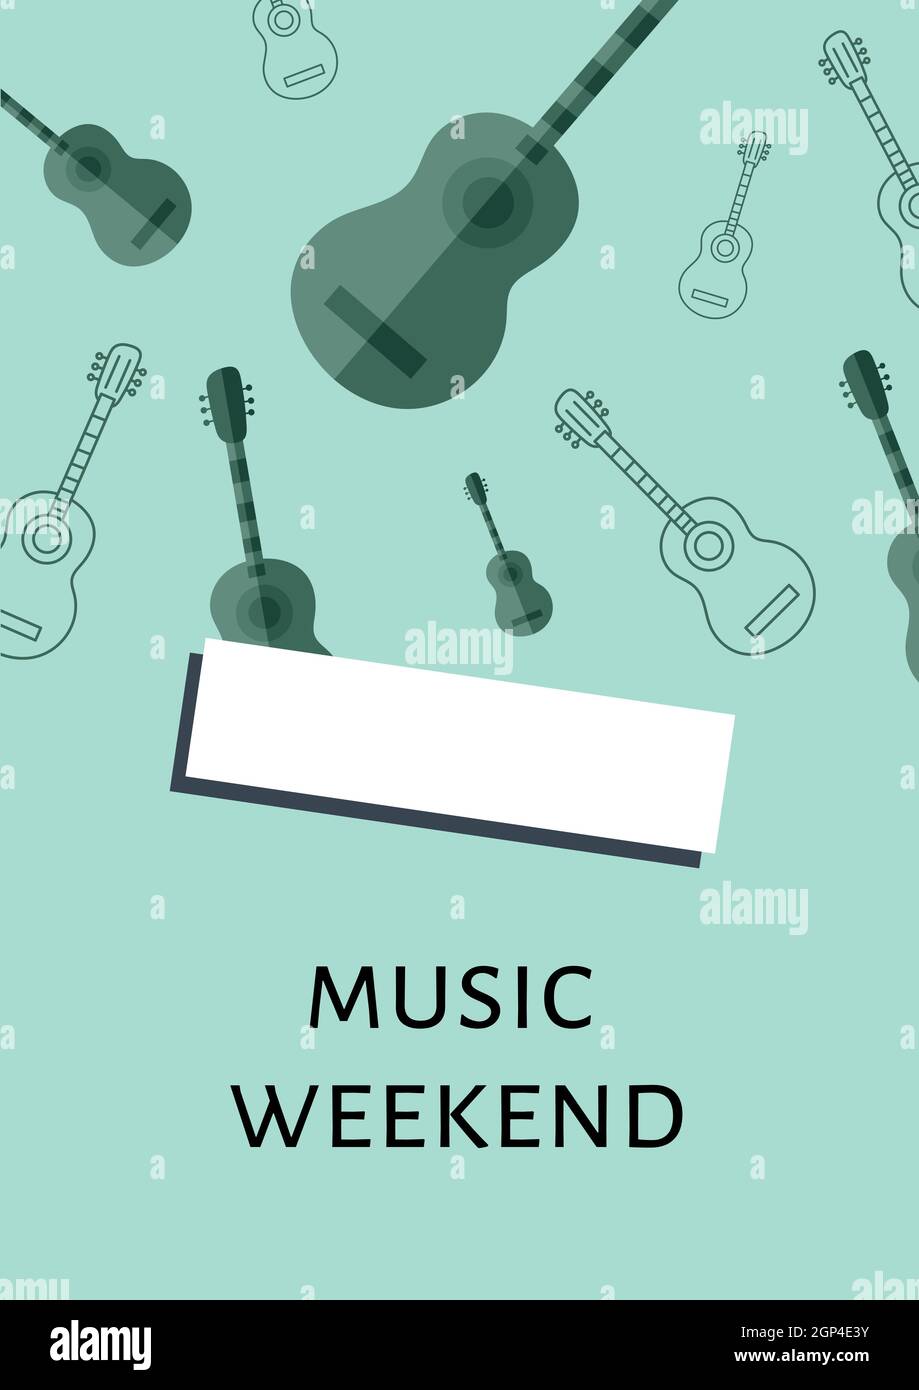 Composition of music weekend text and guitar icons on blue background Stock Photo